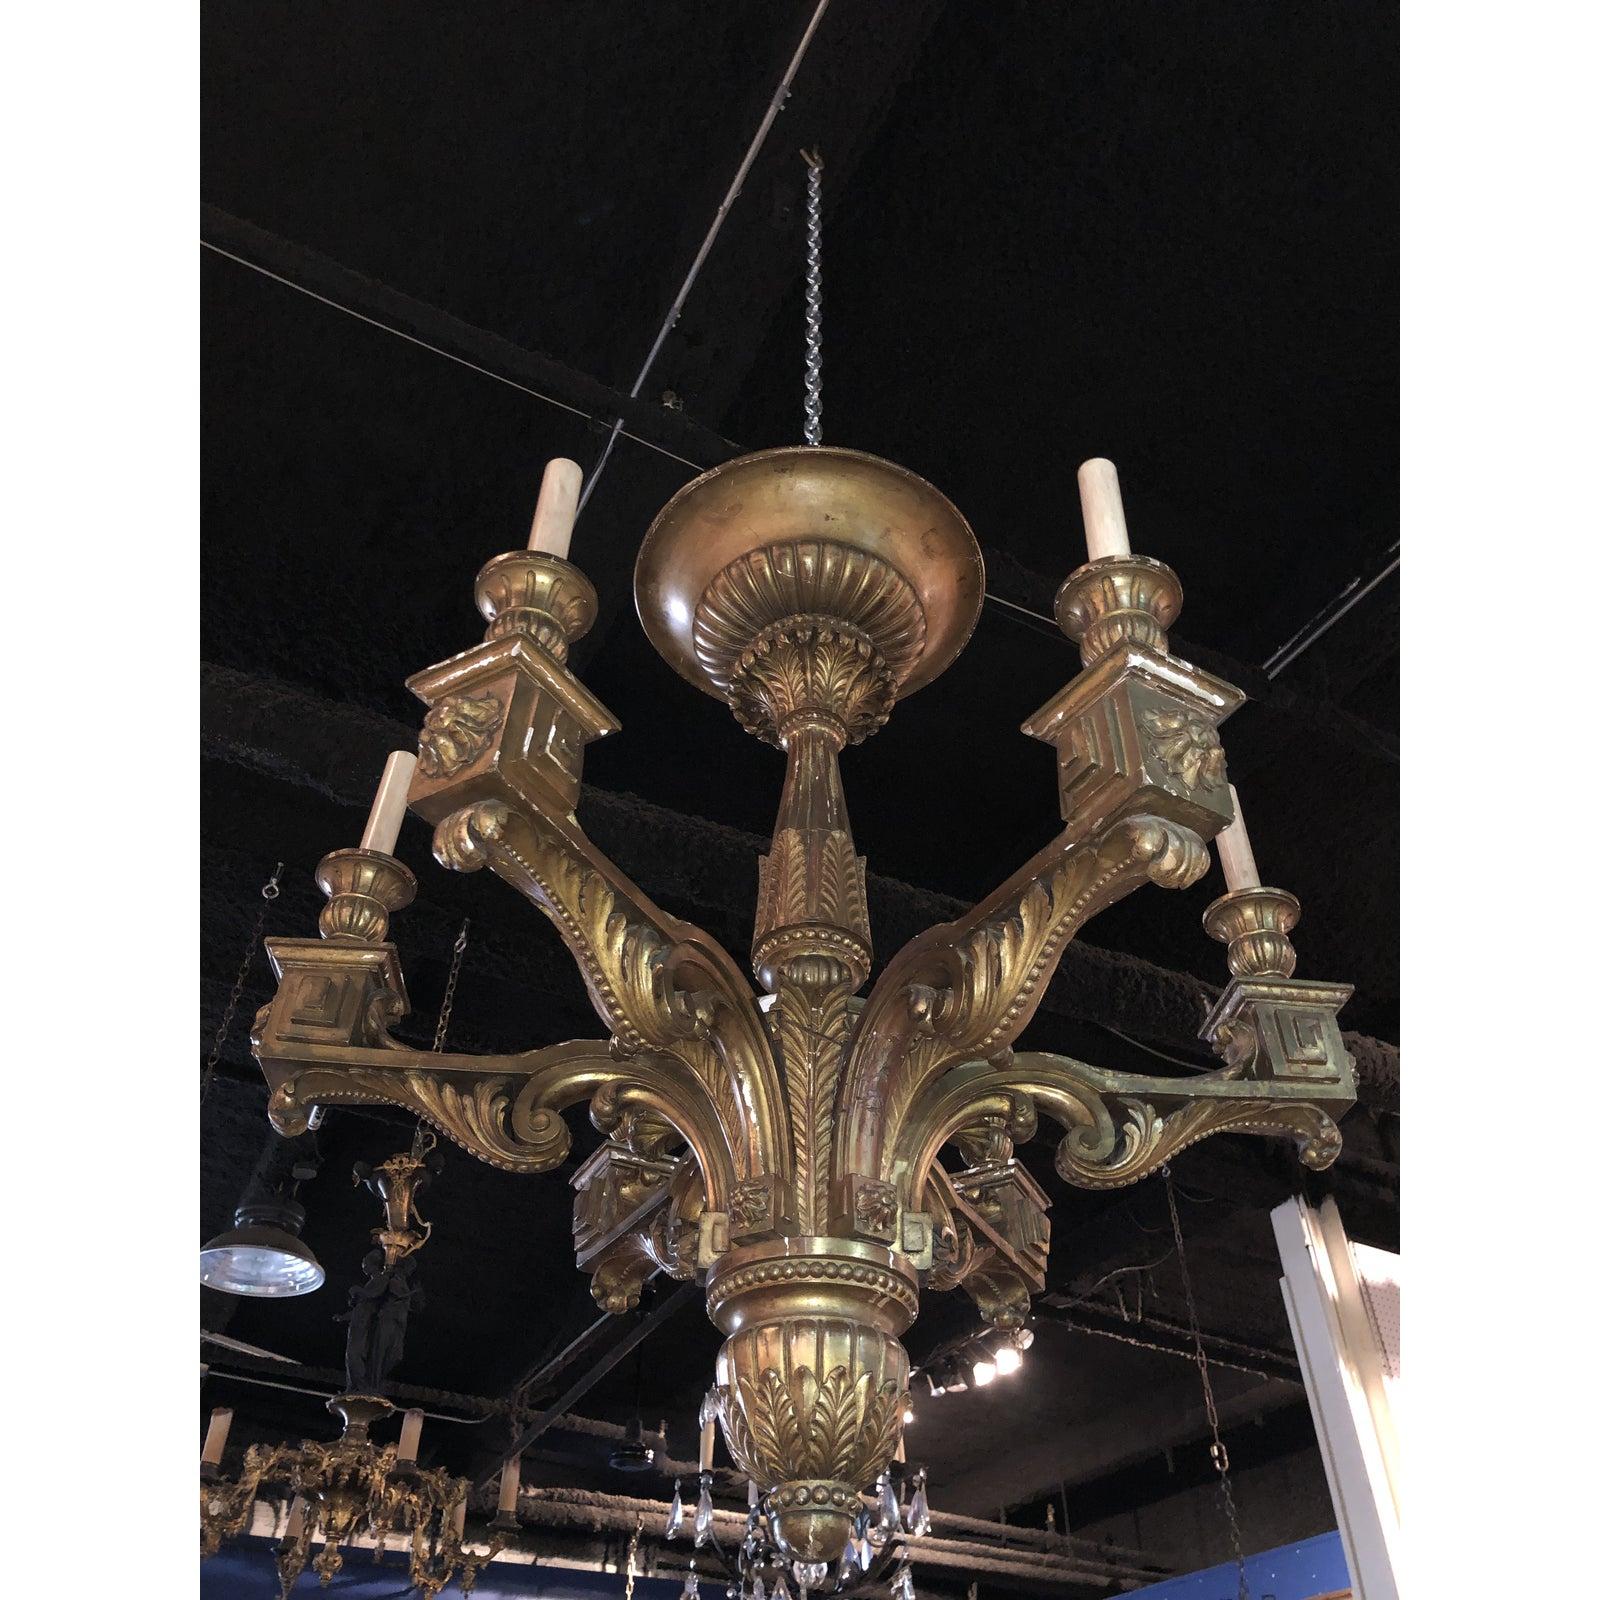  Regency Gilt Wood Chandelier, 19th Century Continental. 6-Armed Gilt carved wood chandelier. The chandelier is of classic style.